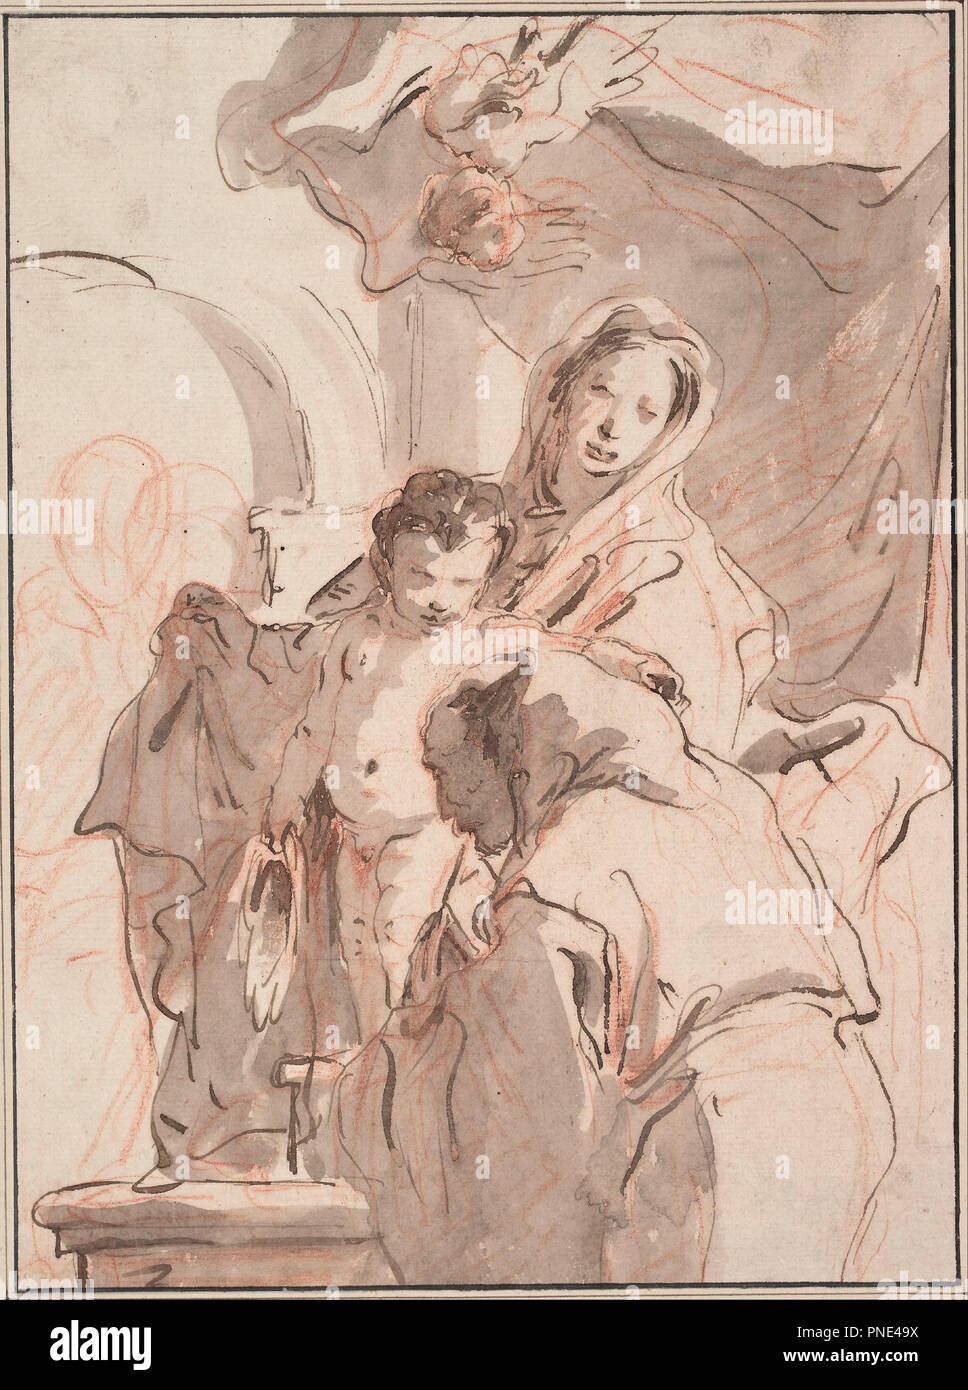 Madonna and Child with Saint, c. 1750-1760. Date/Period: Ca. 1750-1760. Pen and brown ink, brown-gray wash, over preparatory sketch in red chalk. Author: Giovanni Battista Tiepolo. Stock Photo